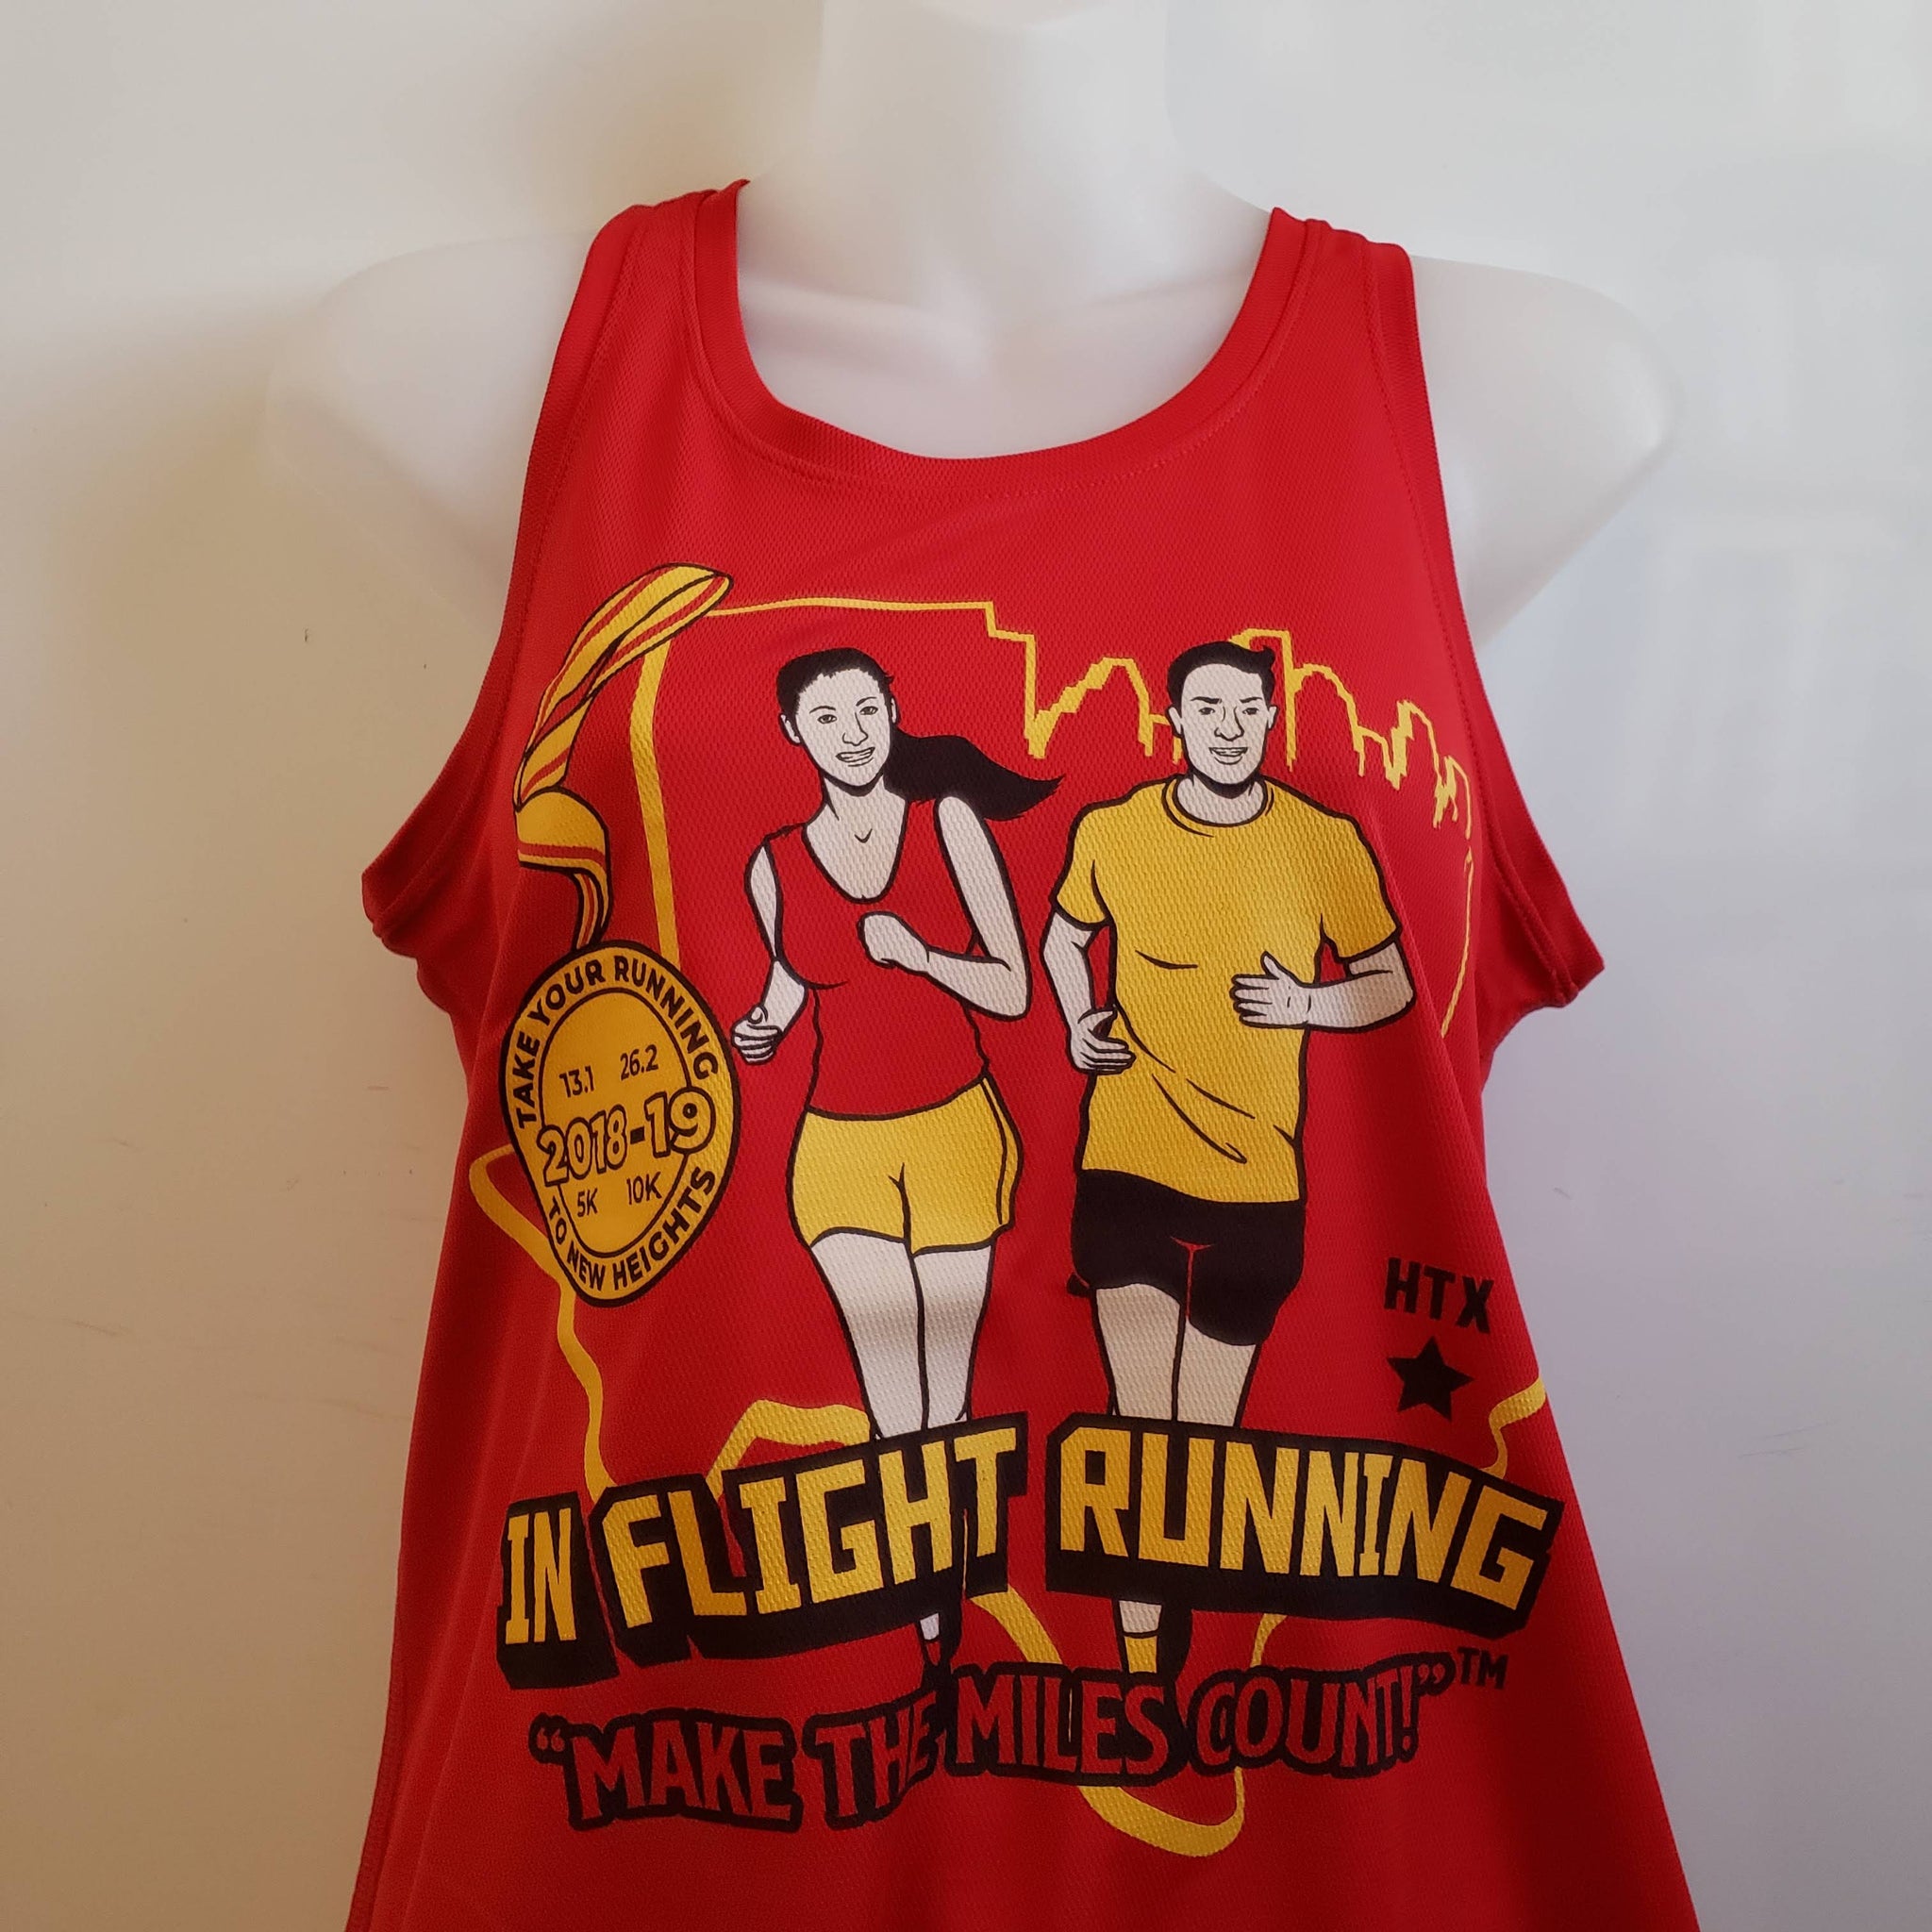 2018-19 In Flight Running - Women's Dry Fit Tank - Medal Time Red